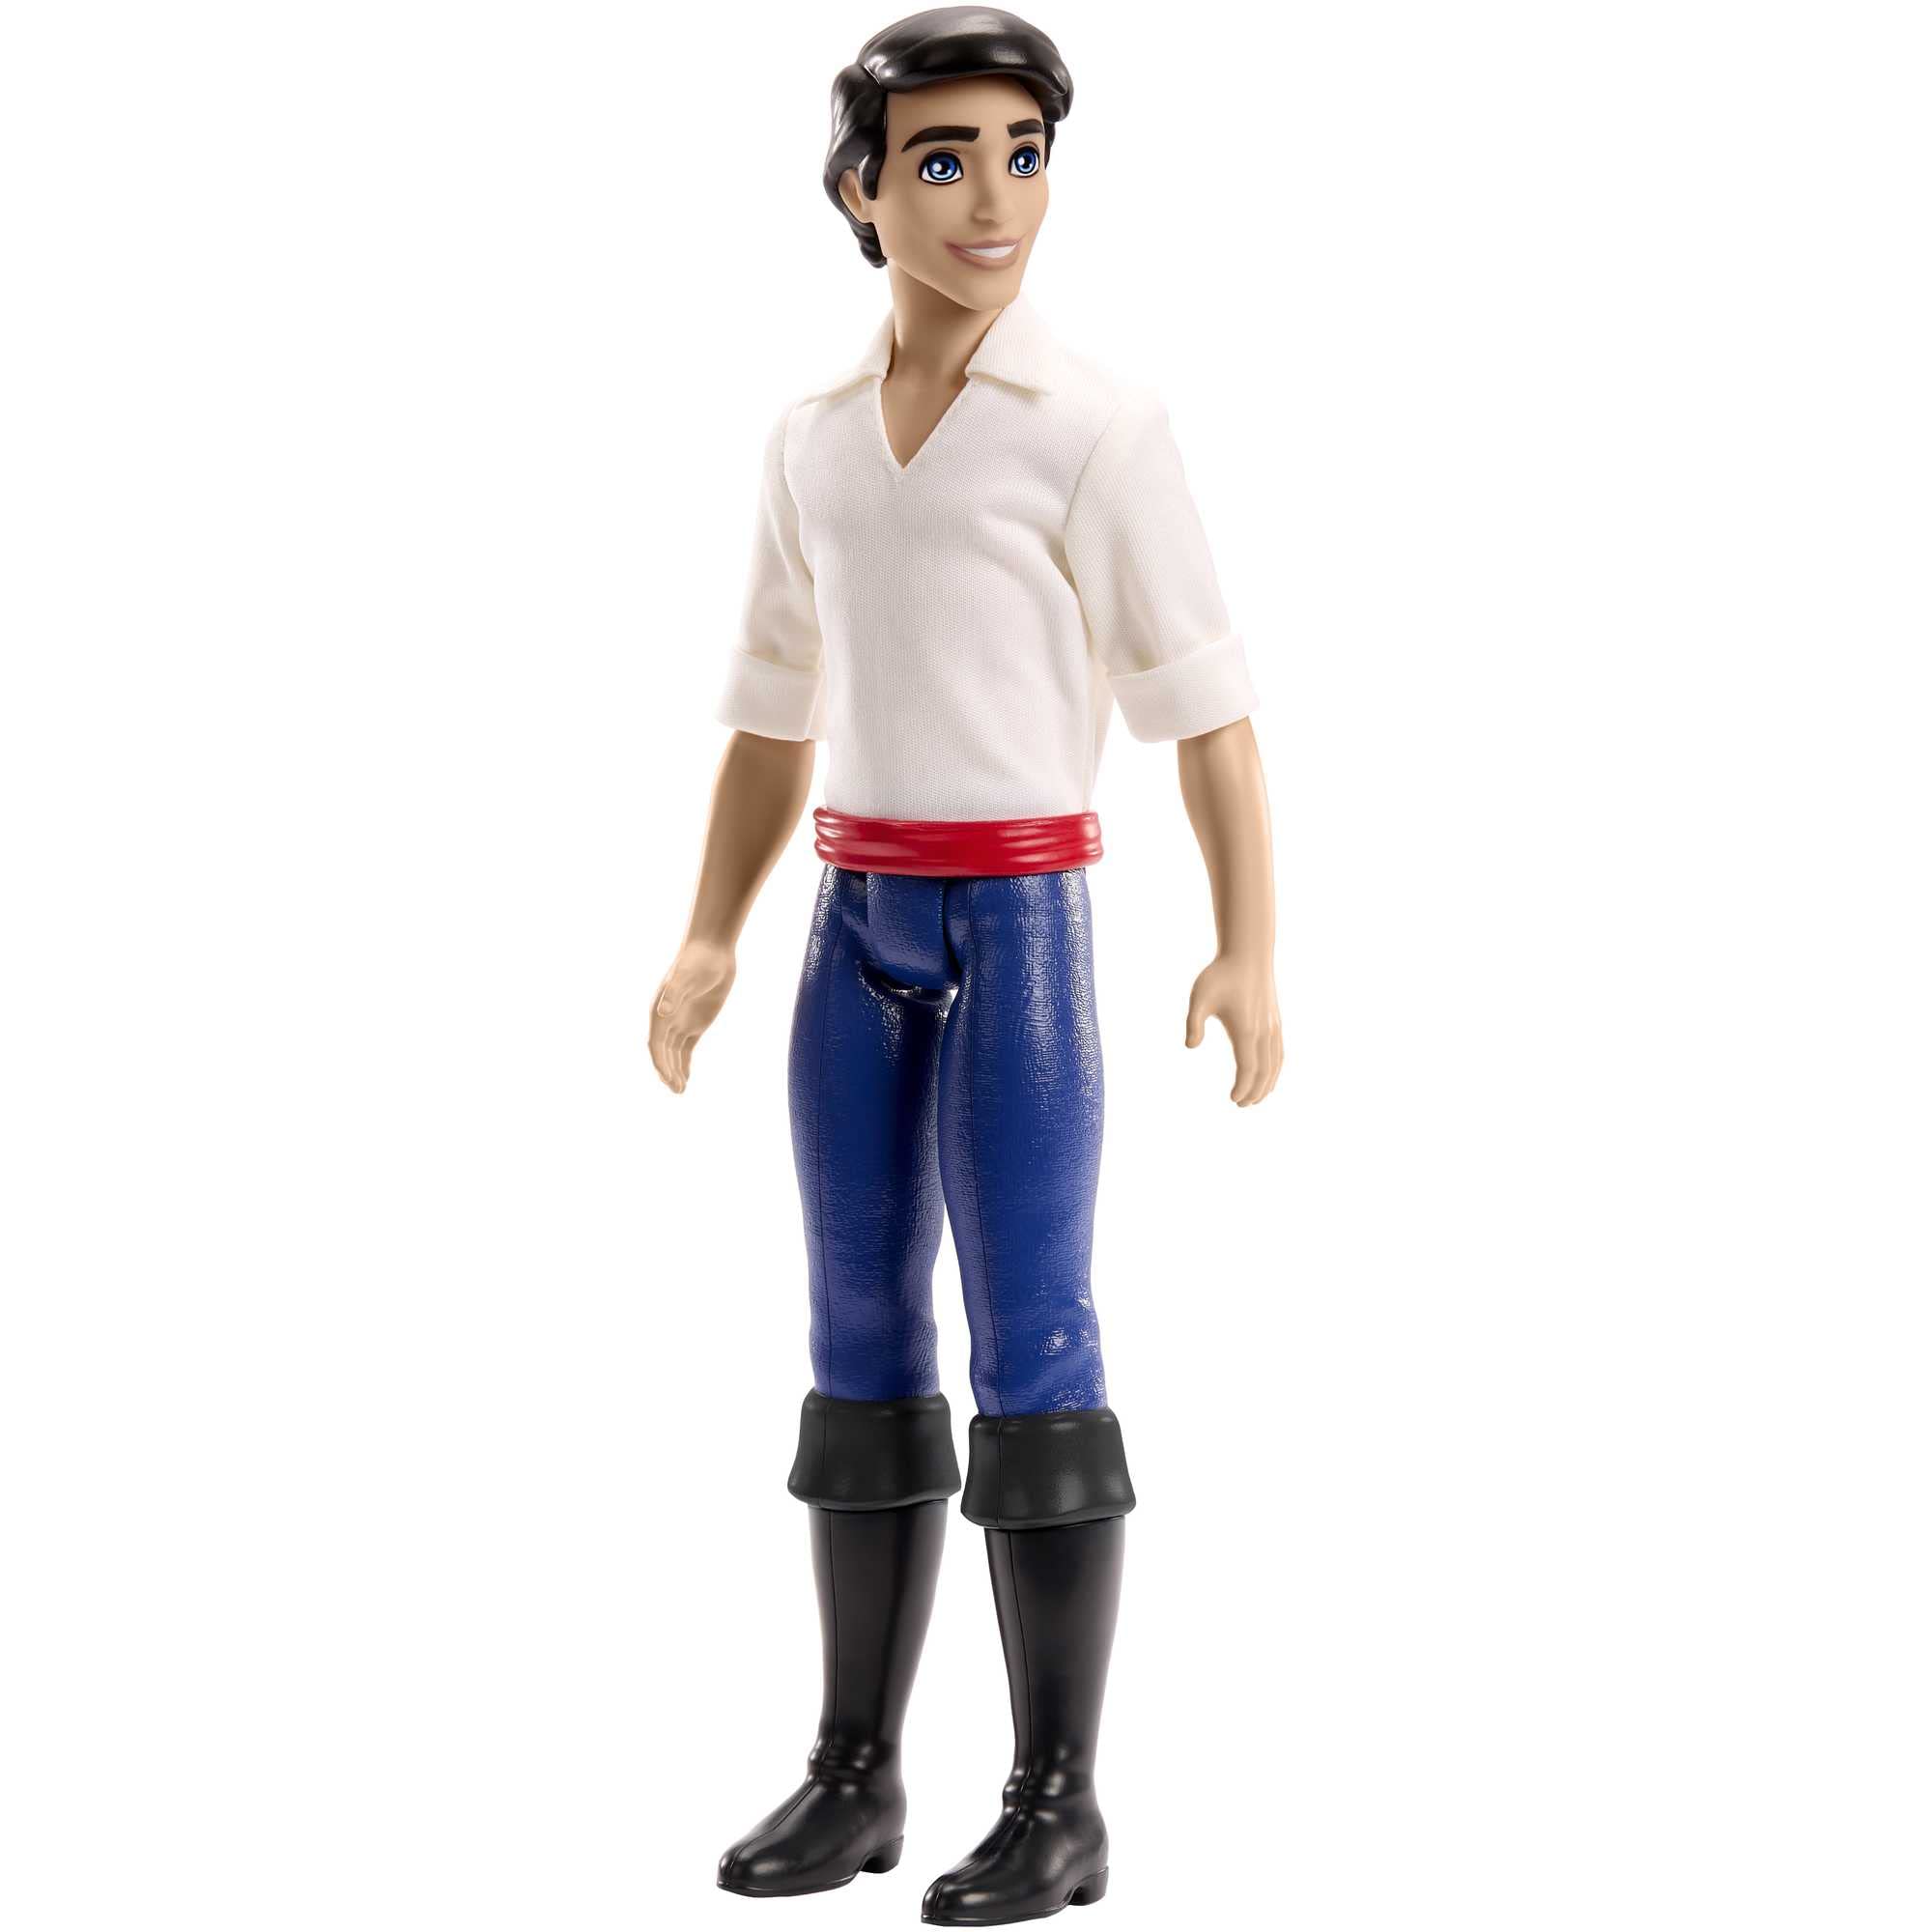 Disney Princess Prince Eric Fashion Doll in Hero Outfit from Disney Movie The Little Mermaid, Posable